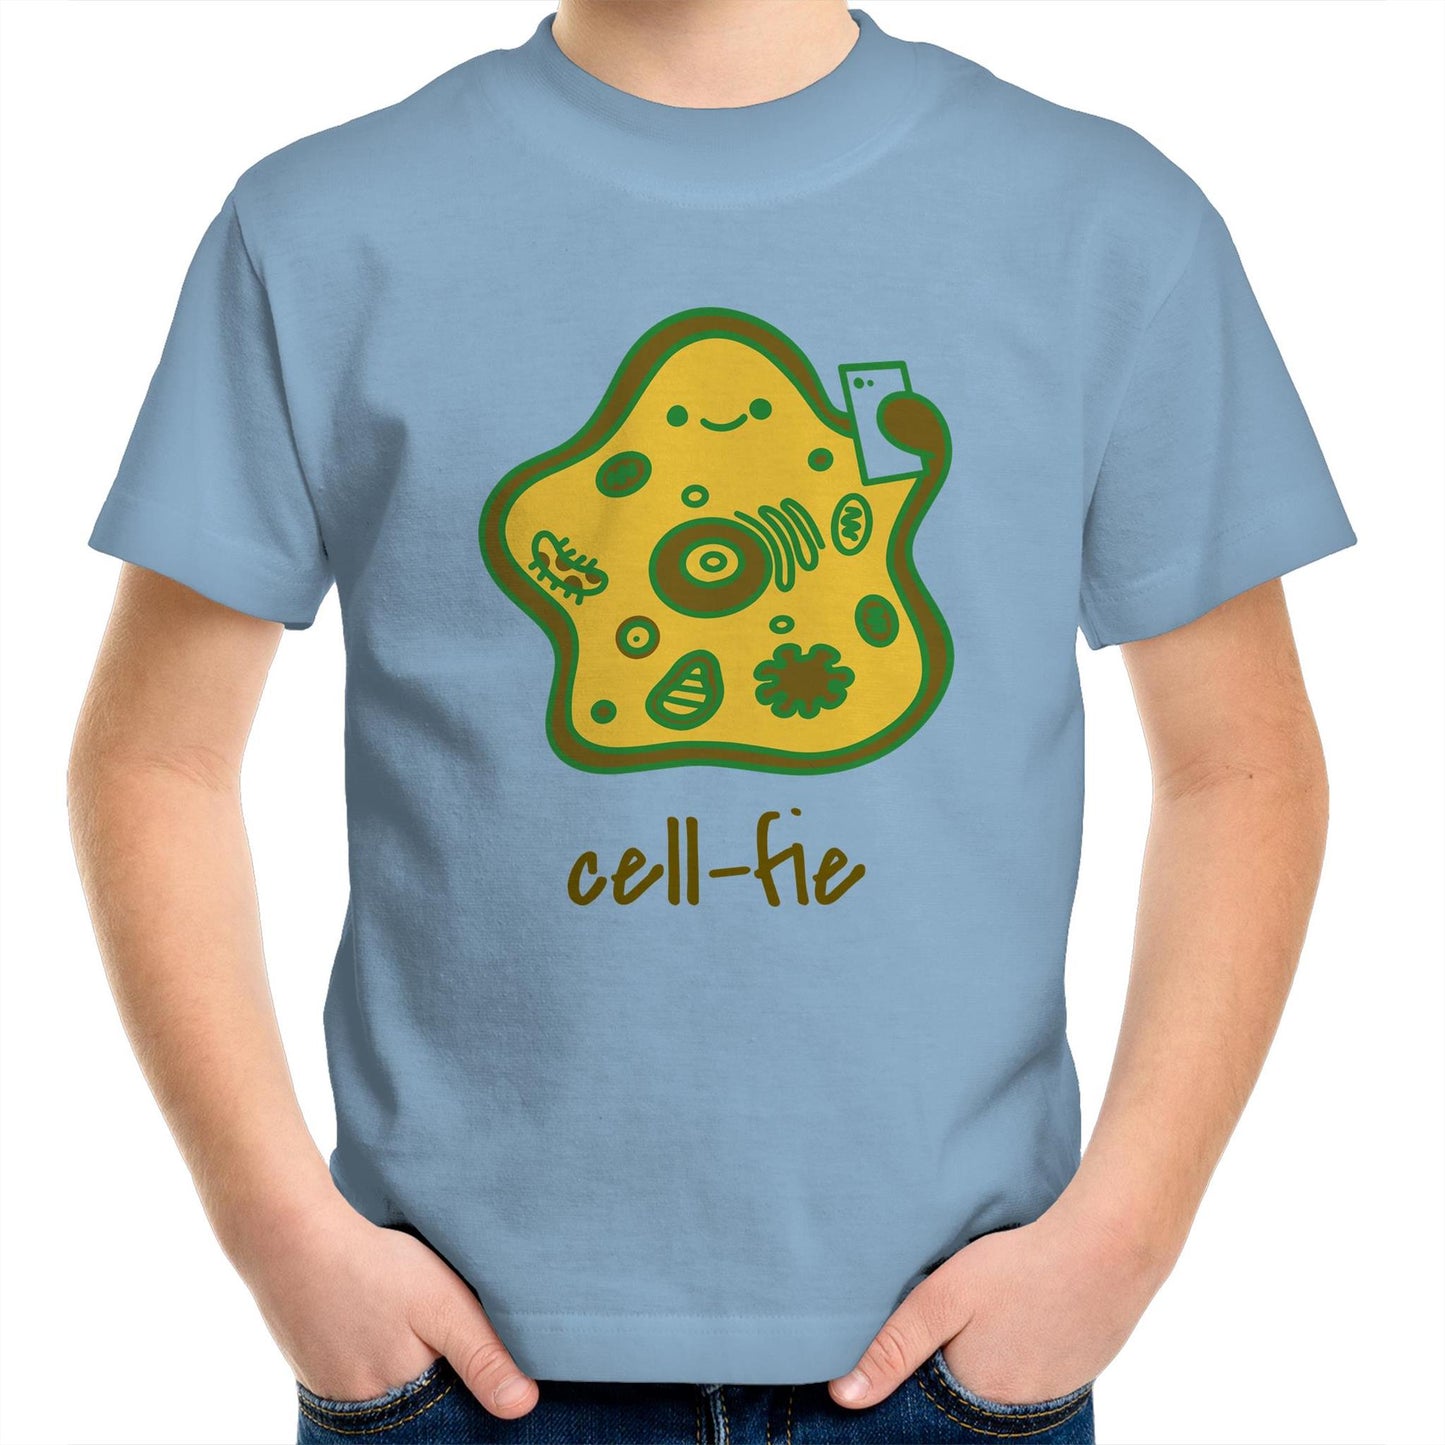 Cell-fie - Kids Youth Crew T-Shirt Carolina Blue Kids Youth T-shirt Science